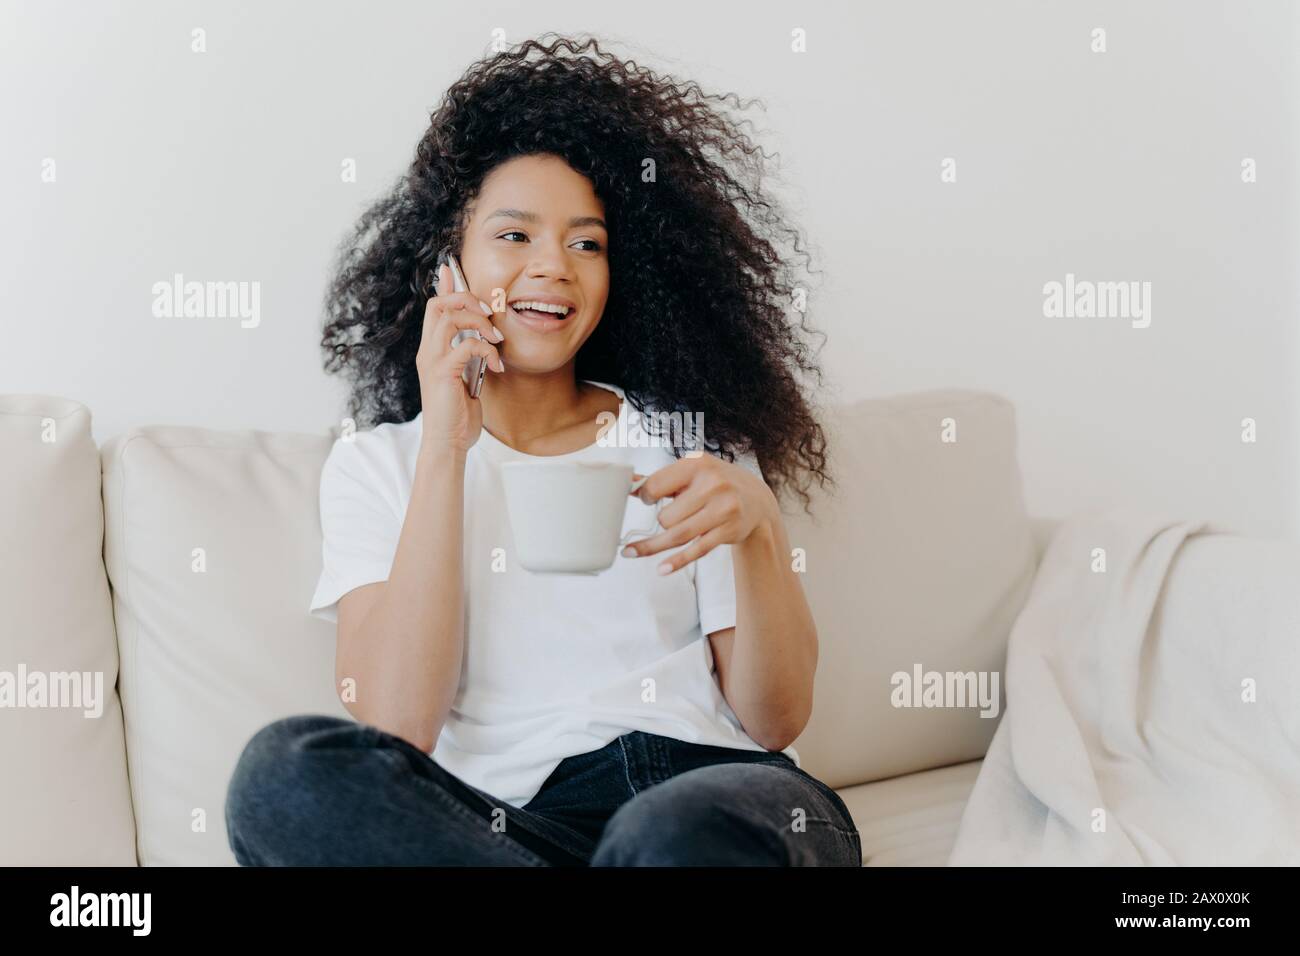 Smiling millennial girl with Afro hair, enjoys cellphone conversation with hot drink in cup, has healthy skin, dressed casually, sits on white sofa at Stock Photo